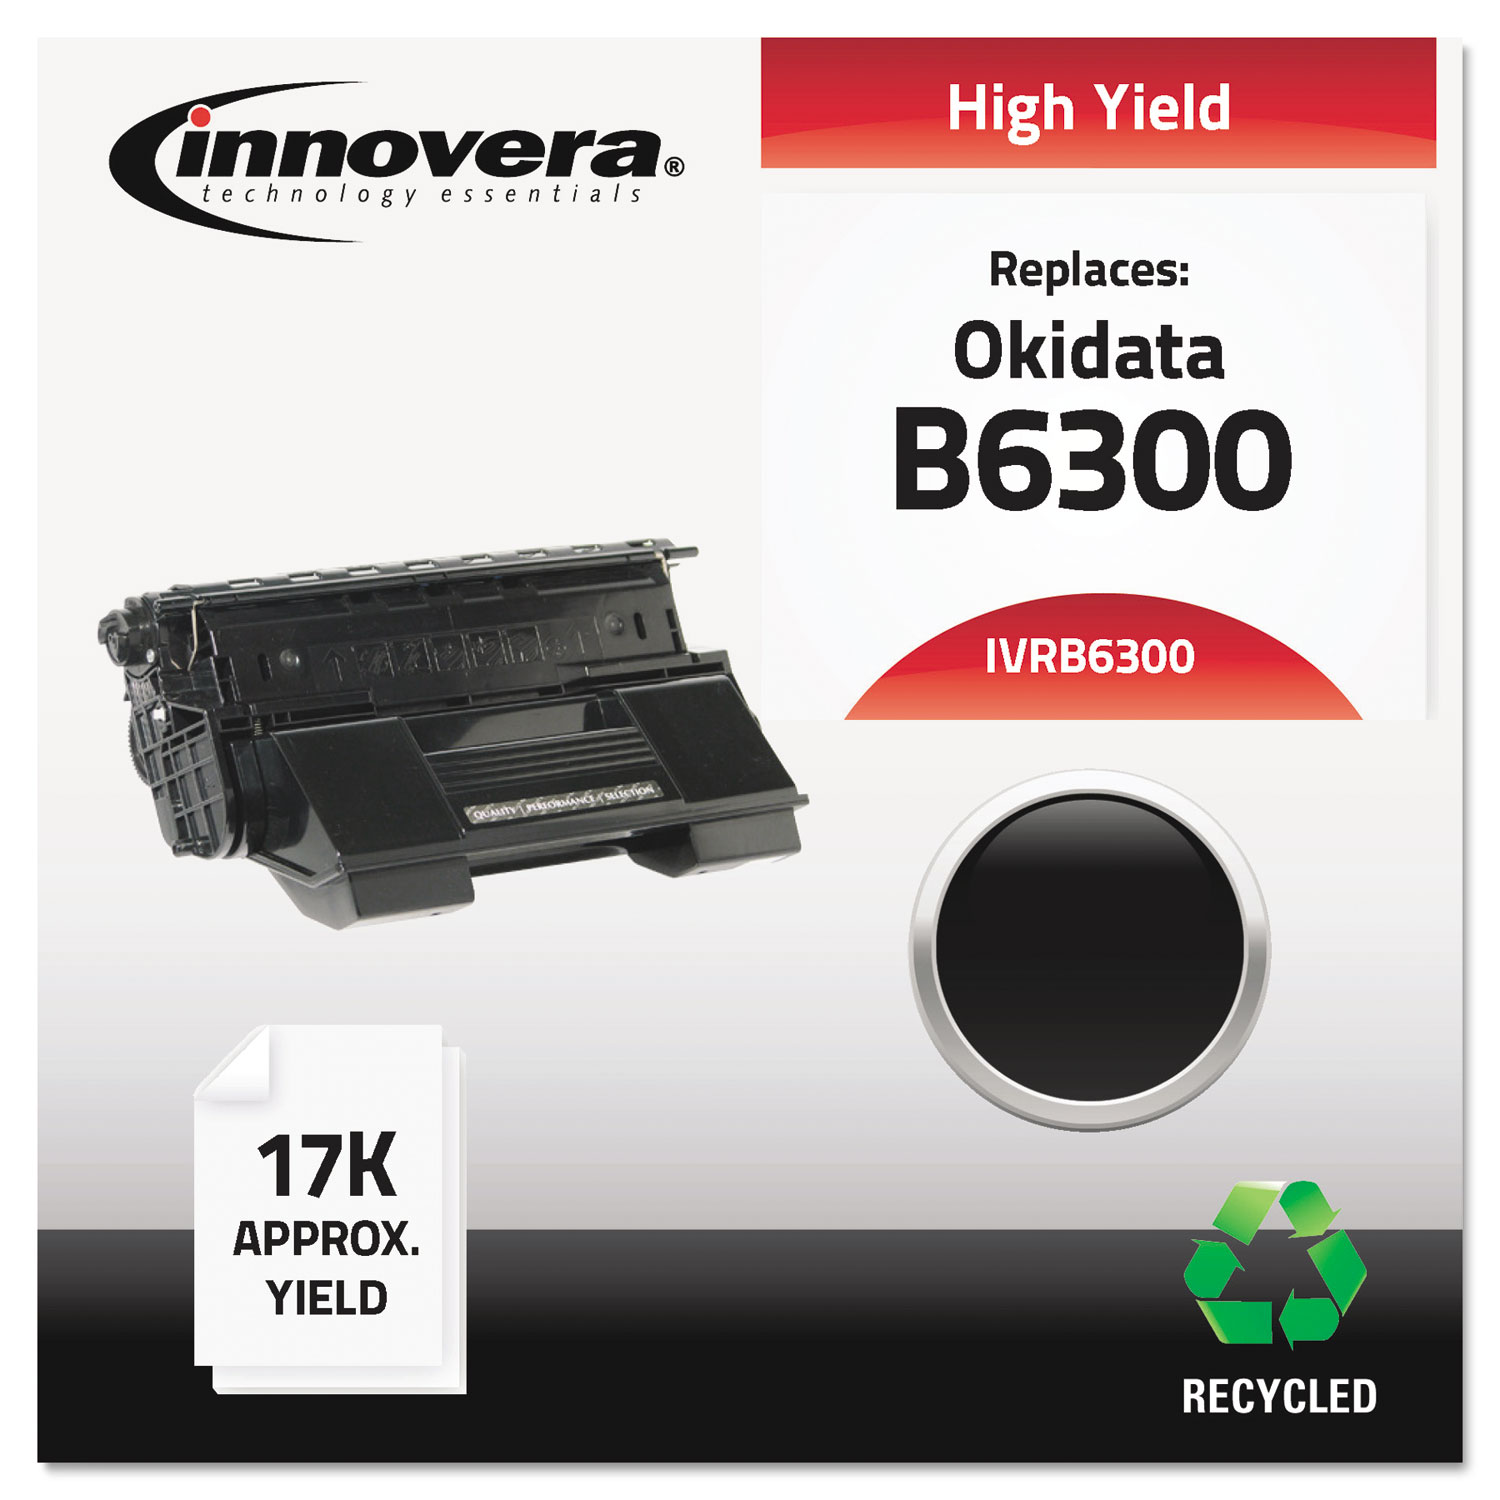 Remanufactured 52114502 (B6300) High-Yield Toner, 17000 Page-Yield, Black